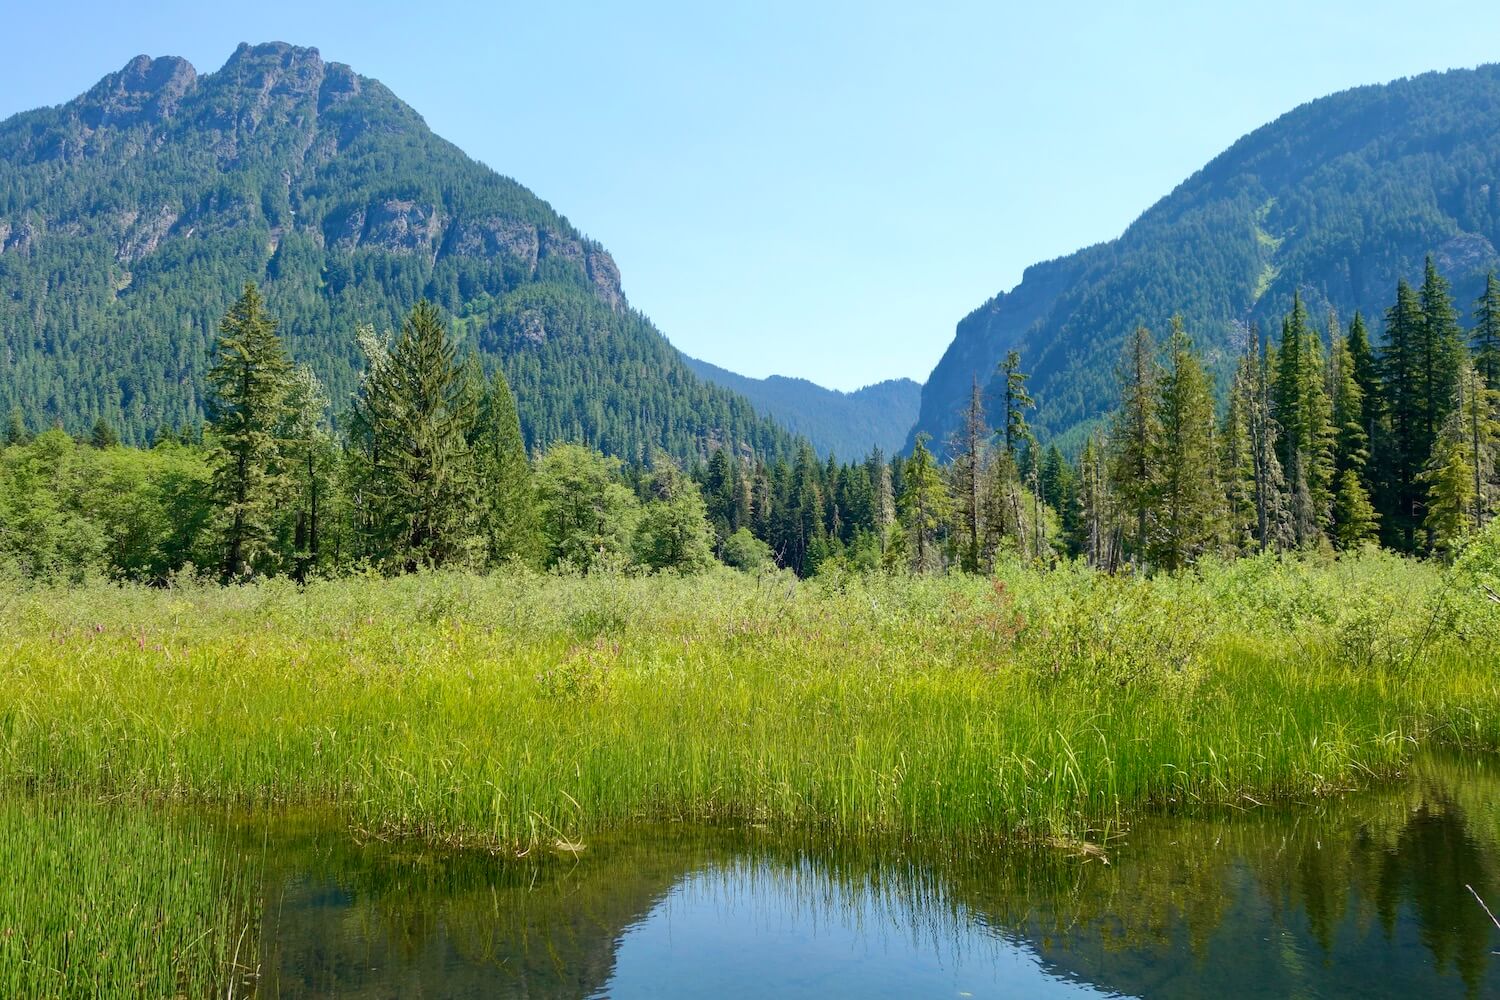 This meadow scene is at the start of the trail that goes to Big Four Ice Caves. The placid water is clear and surrounded by tall green grass and fir trees in the distance. The horizon has several mountains under a blue sky.